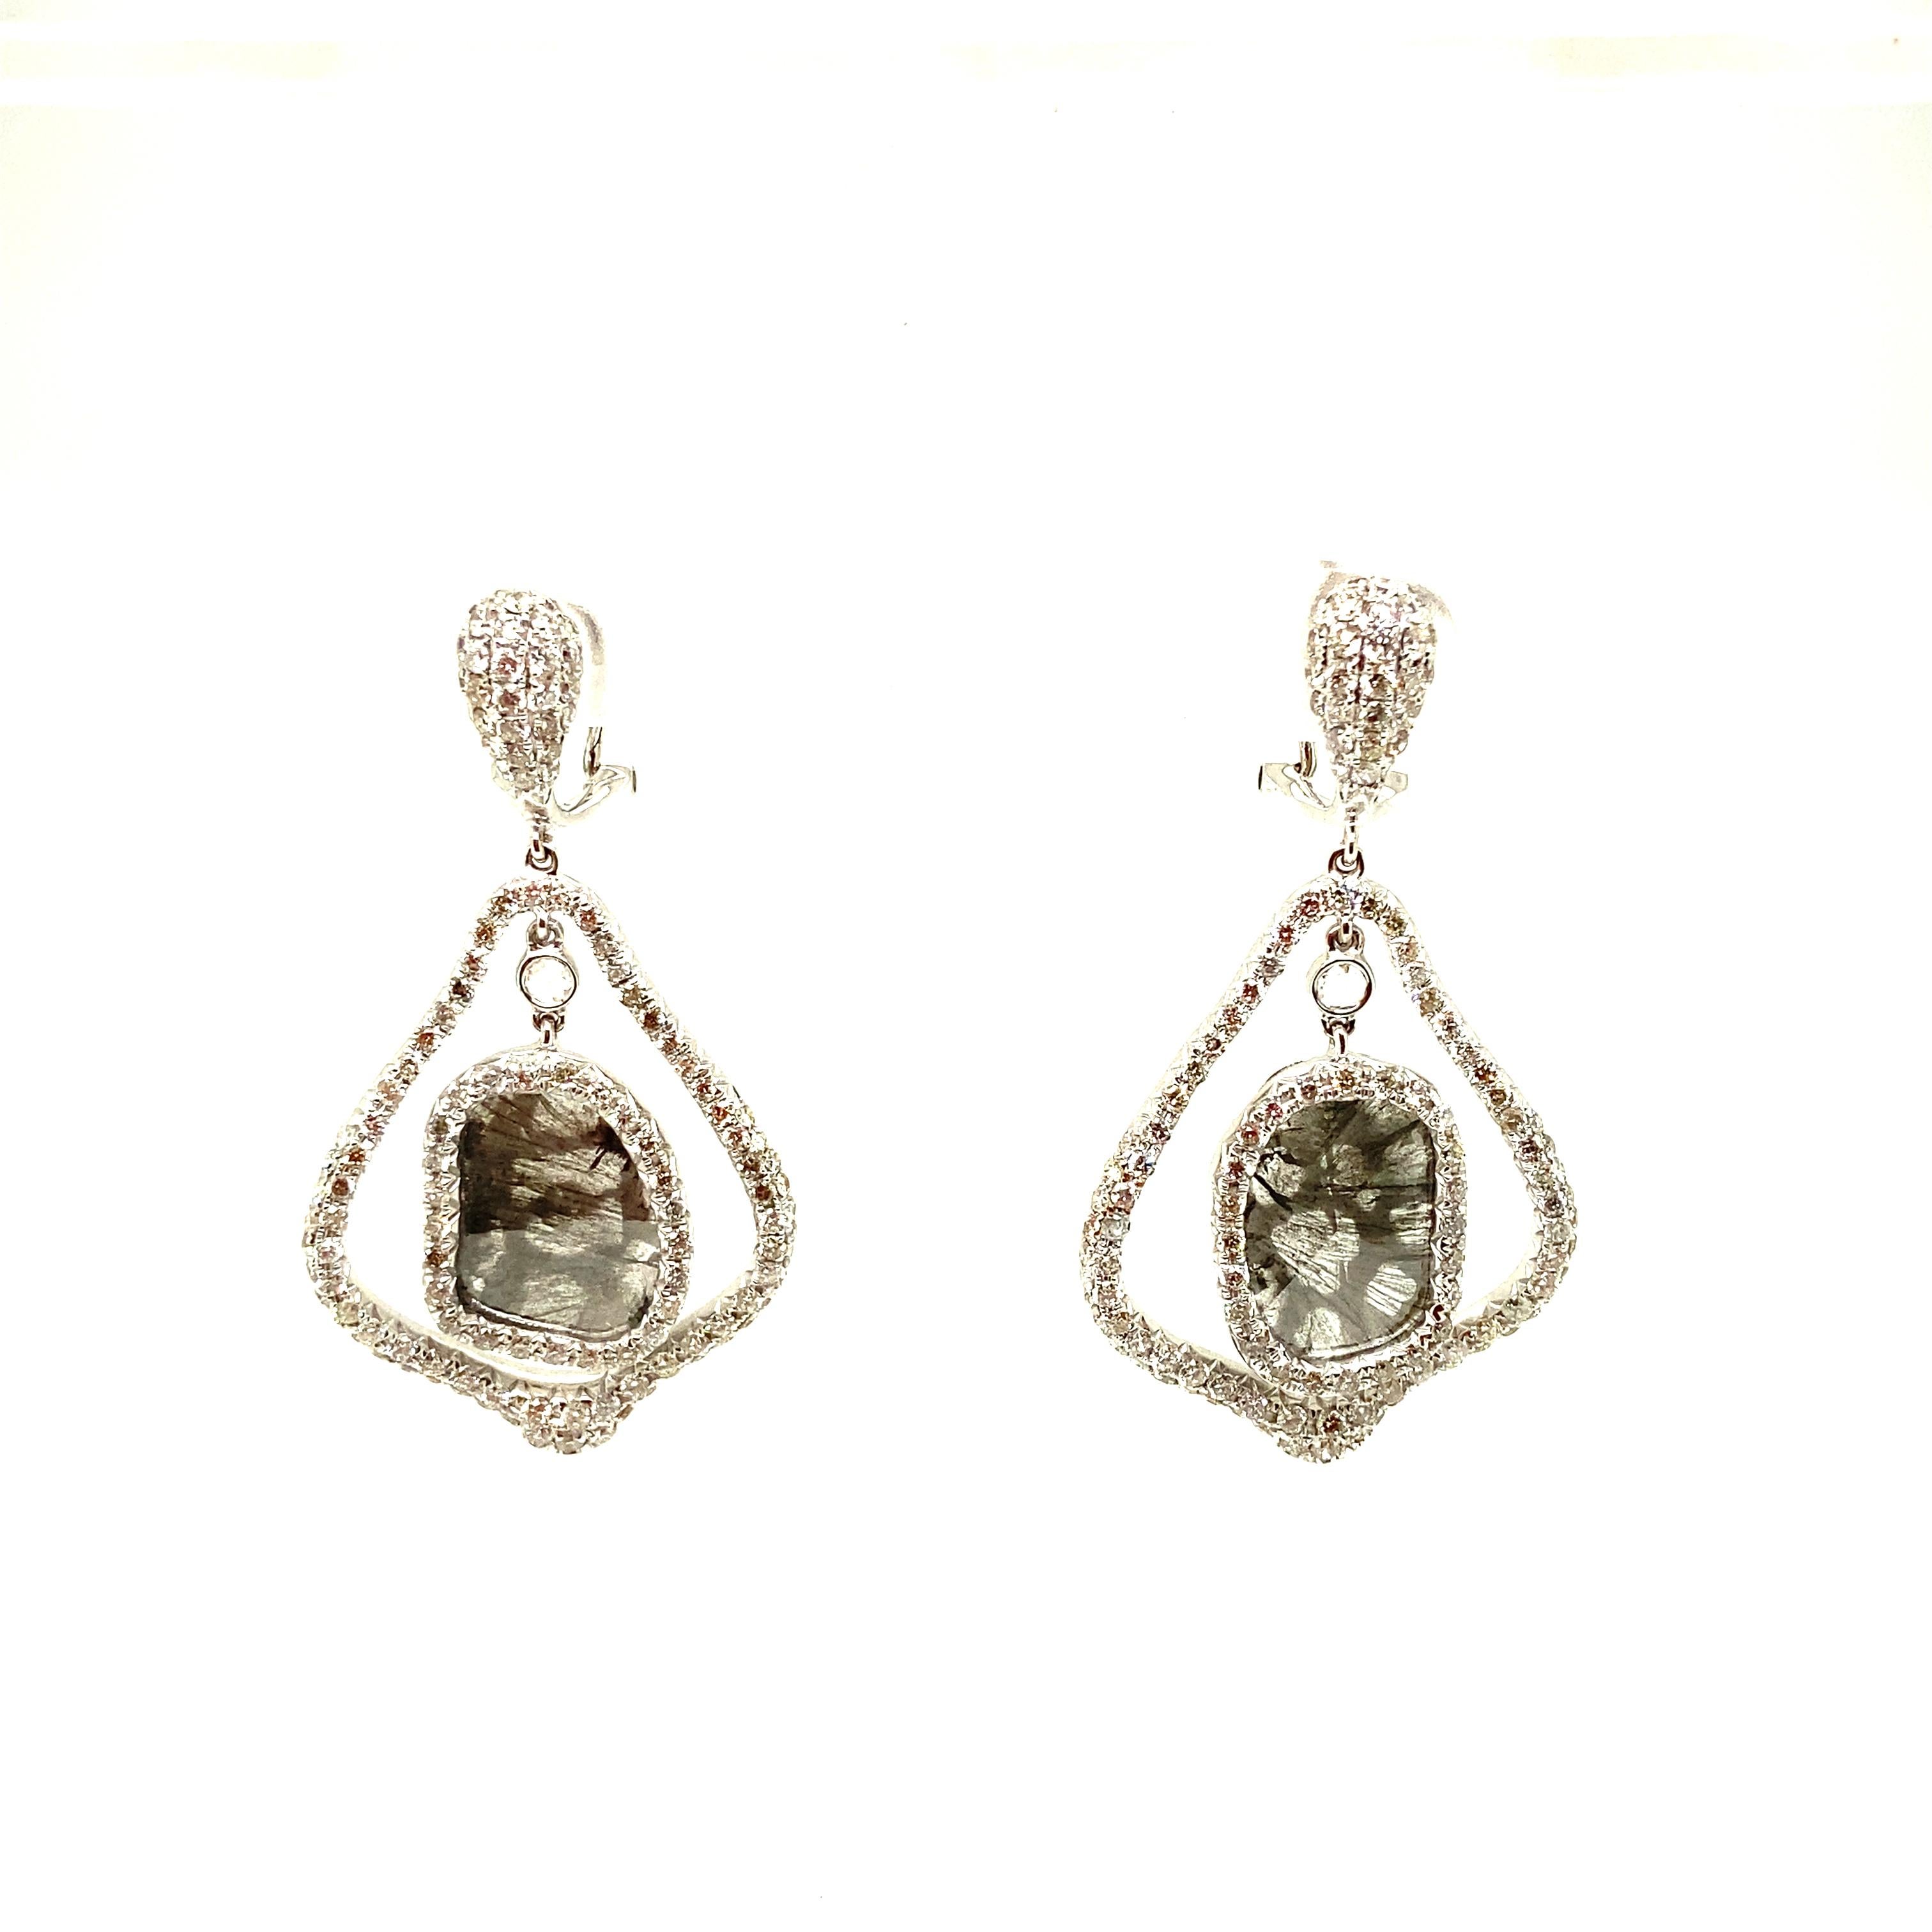 Natural Fancy Coloured Diamond and White Diamond Yellow Gold Earrings:

A unique pair of earrings, it features two natural fancy coloured diamond slices weighing 3.54 carat, surrounded by 2.50 carat of white round brilliant diamonds. The fancy